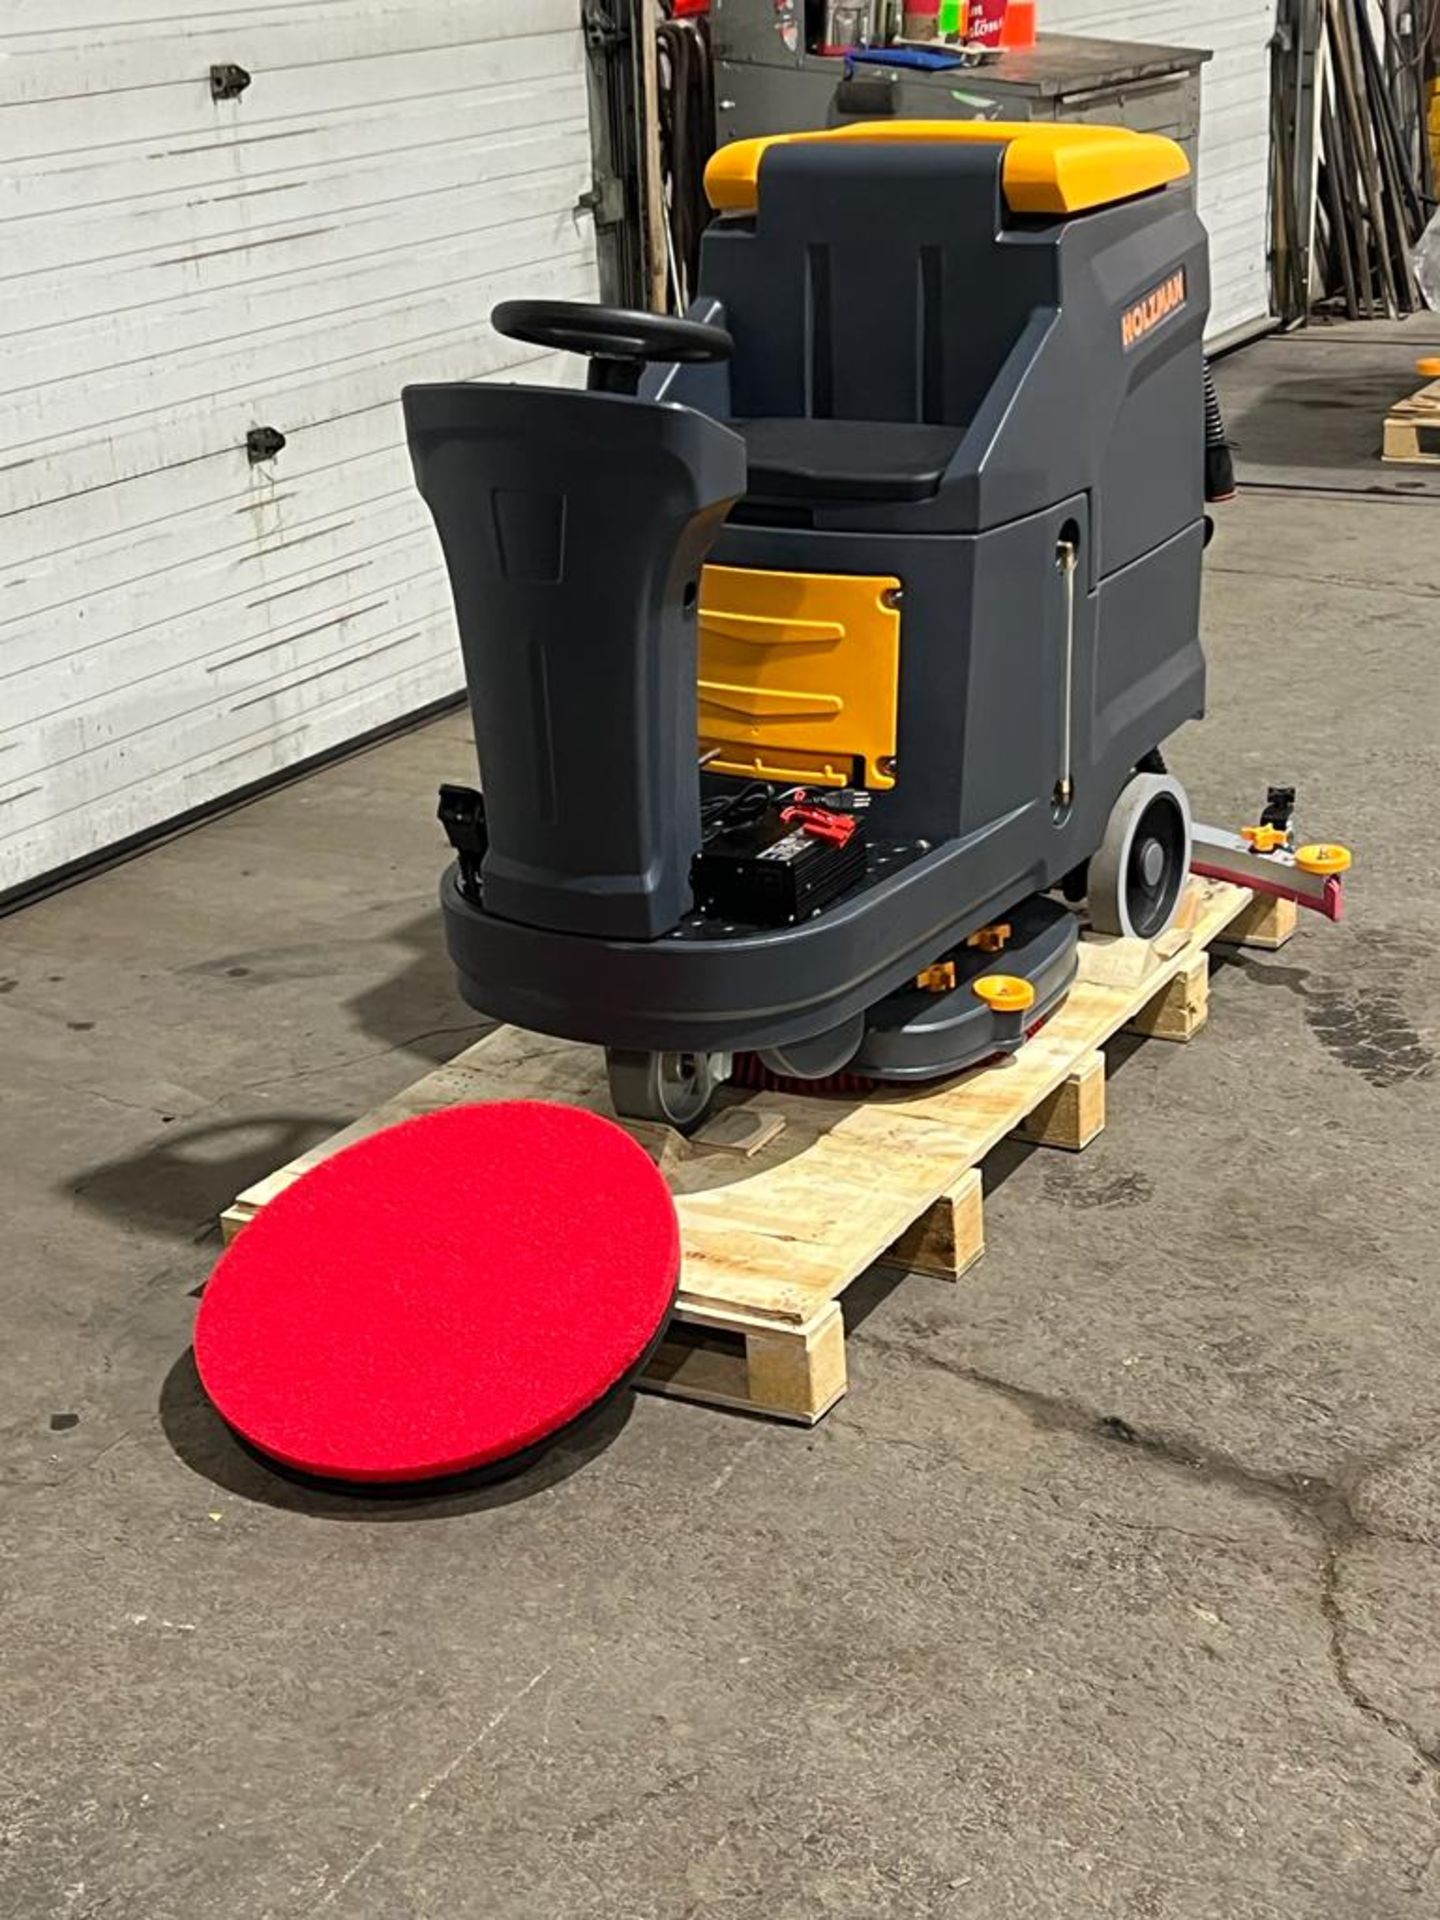 Holzman MINT RIDE ON Floor Sweeper Scrubber Unit model K70 - BRAND NEW with extra pads, digital - Image 4 of 6